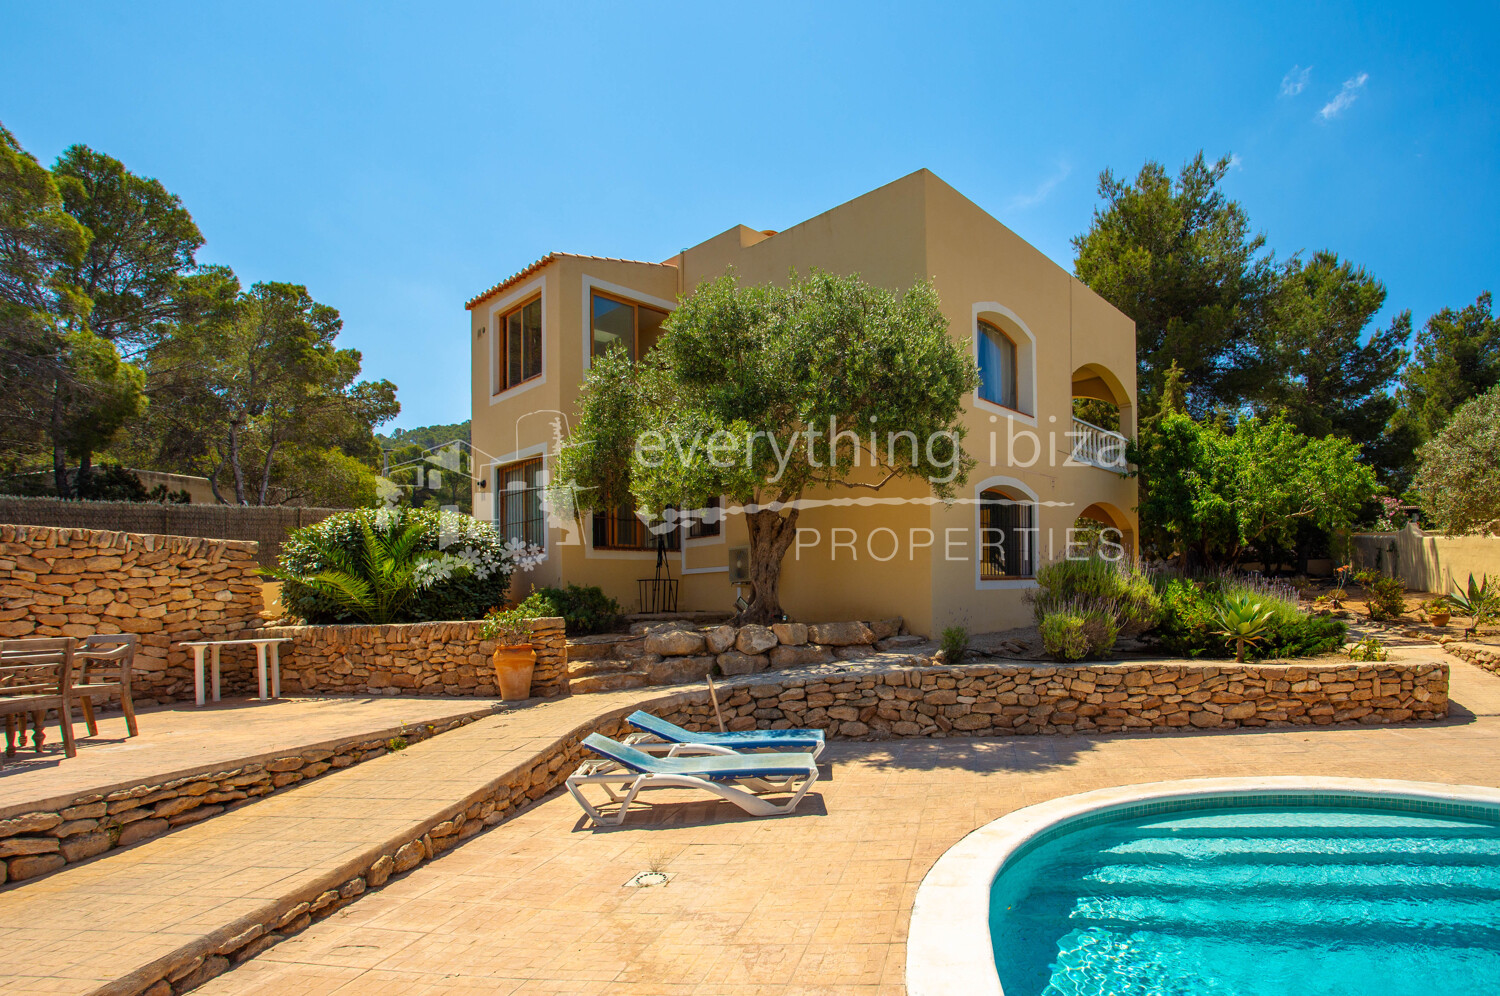 Two Hillside Villas with Swimming Pool, Sea and Sunset Views, ref. 1644, for sale in Ibiza by everything ibiza Properties